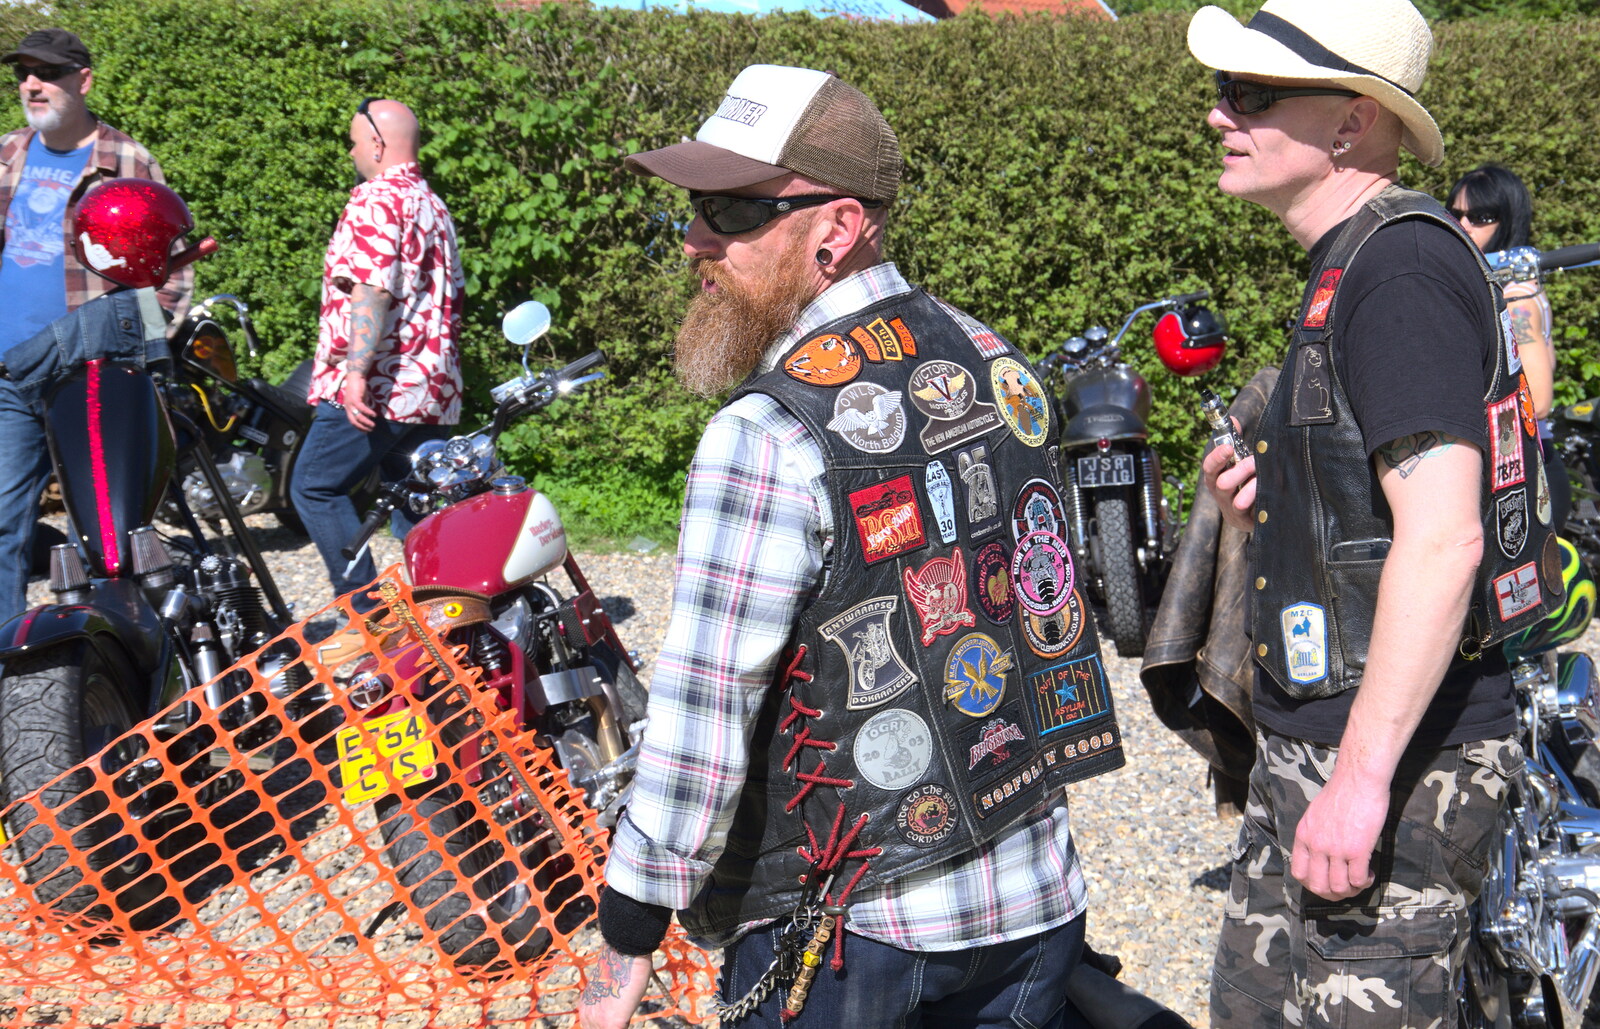 Bikers like badges from Beer, Bikes and Bands, Burston Crown, Burston, Norfolk - 6th May 2018